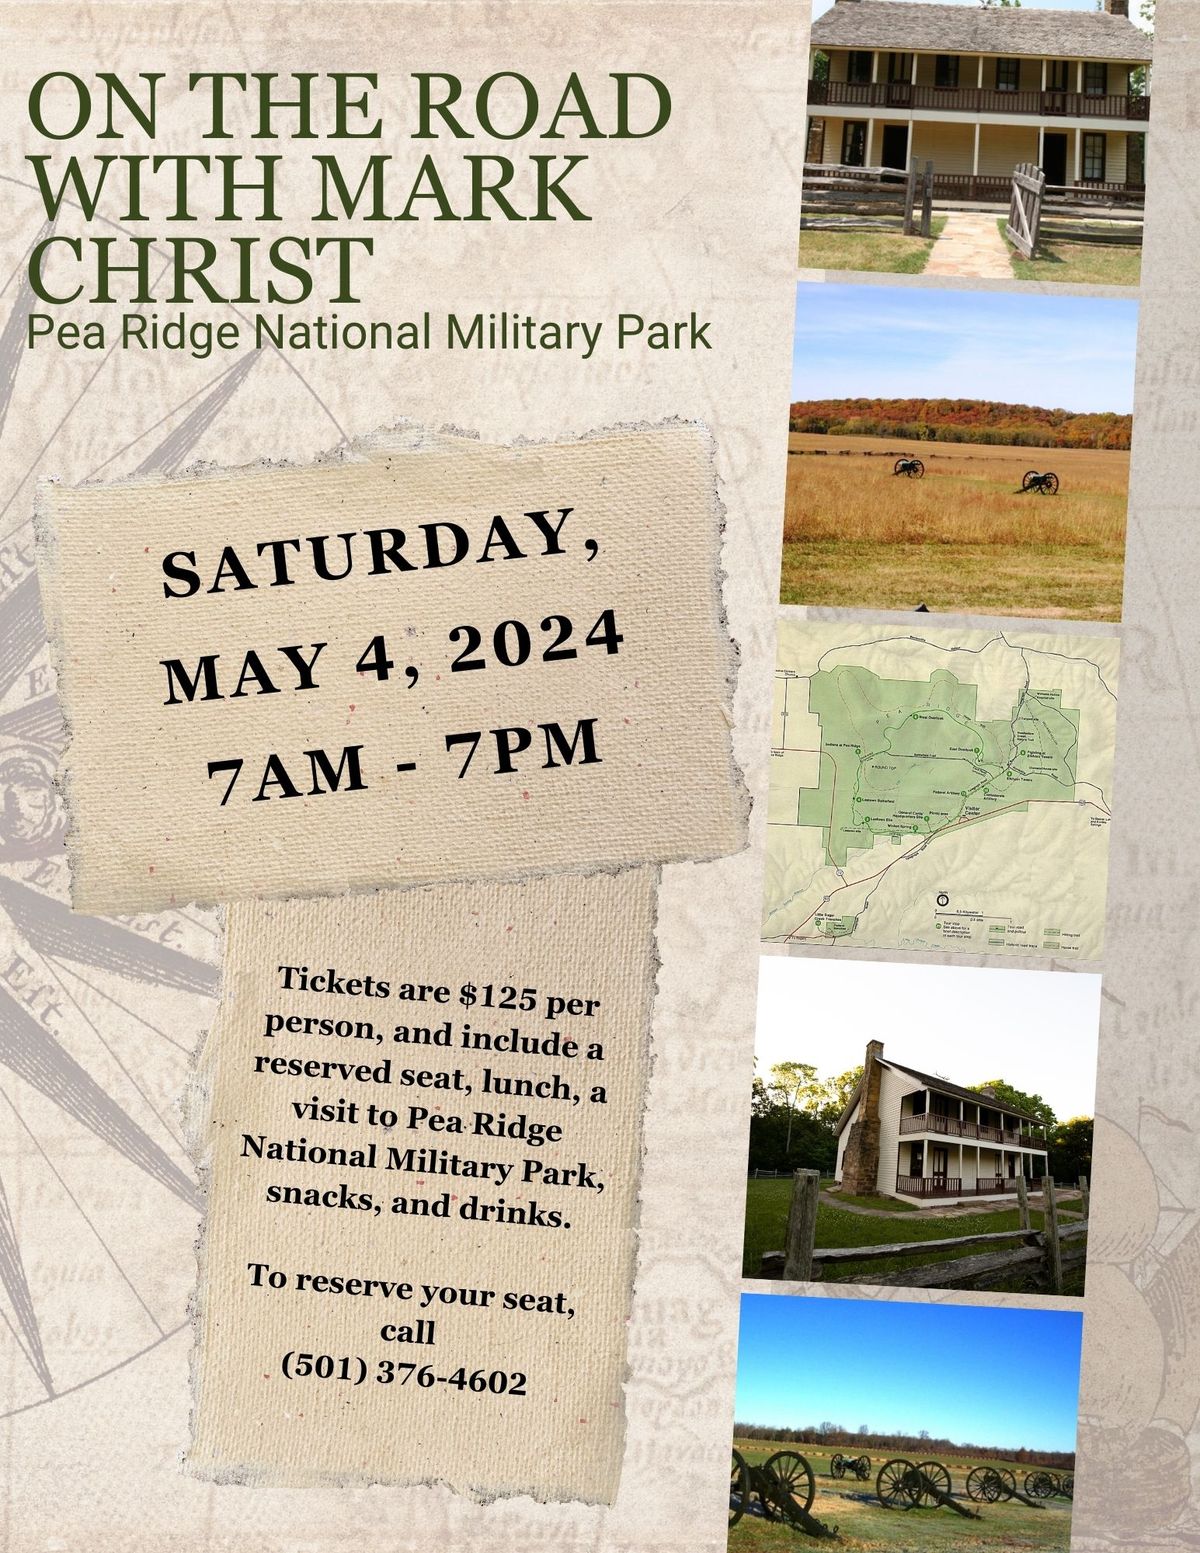 "On the Road with Mark Christ: Pea Ridge" Bus Tour